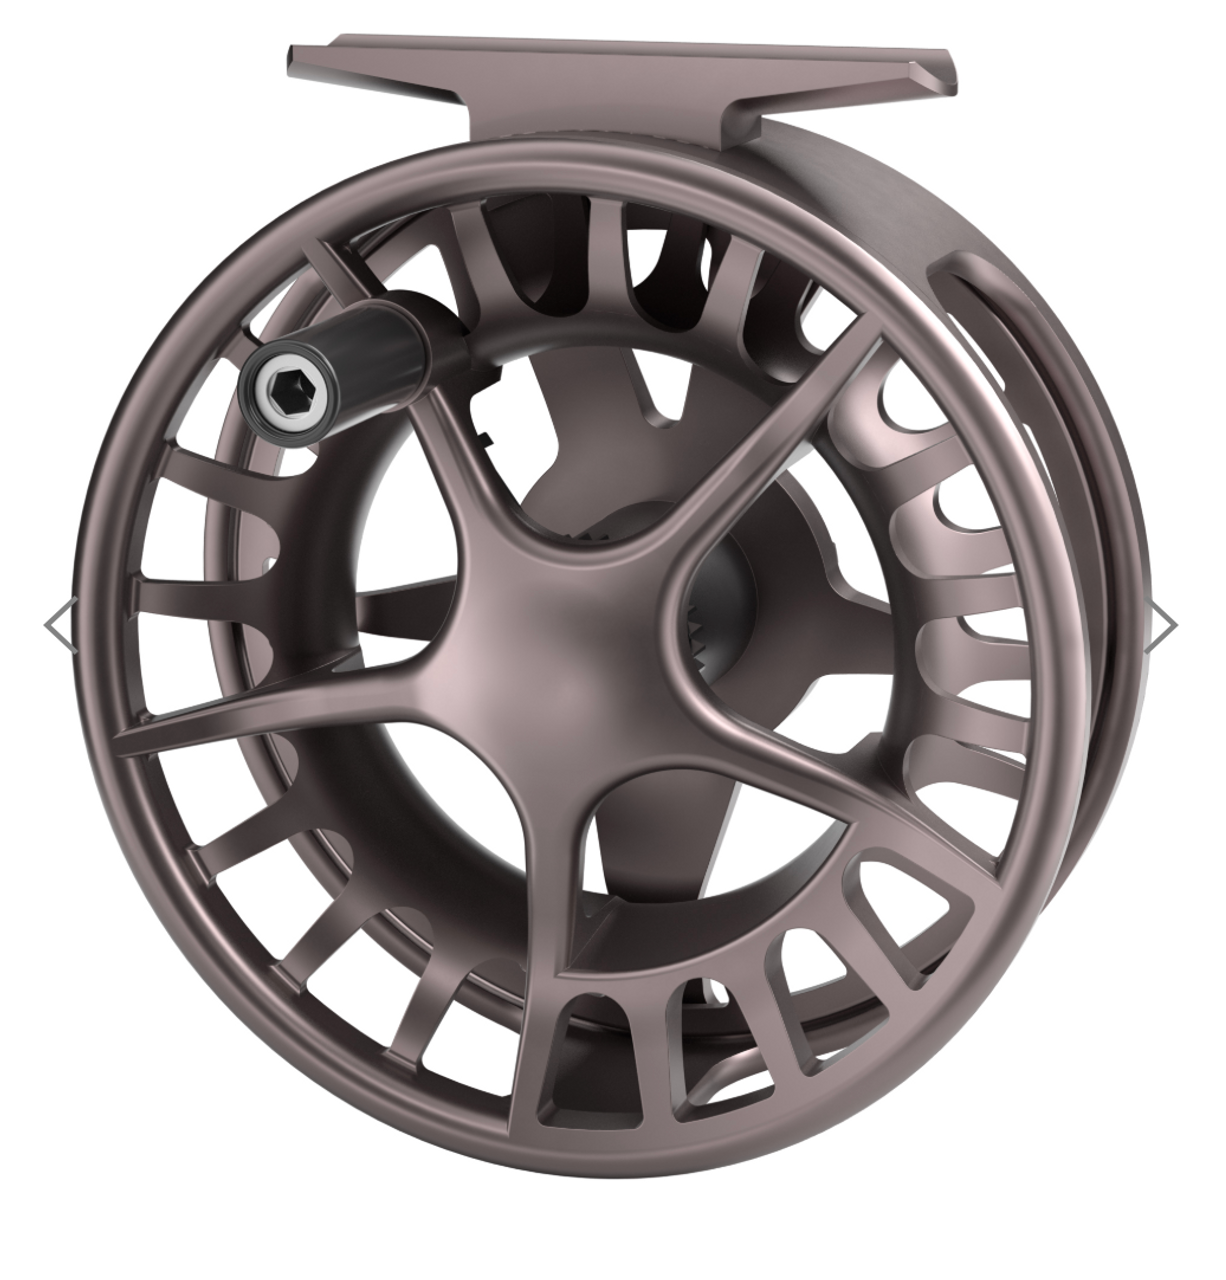 Waterworks-Lamson Remix Fly Reel - Ed's Fly Shop